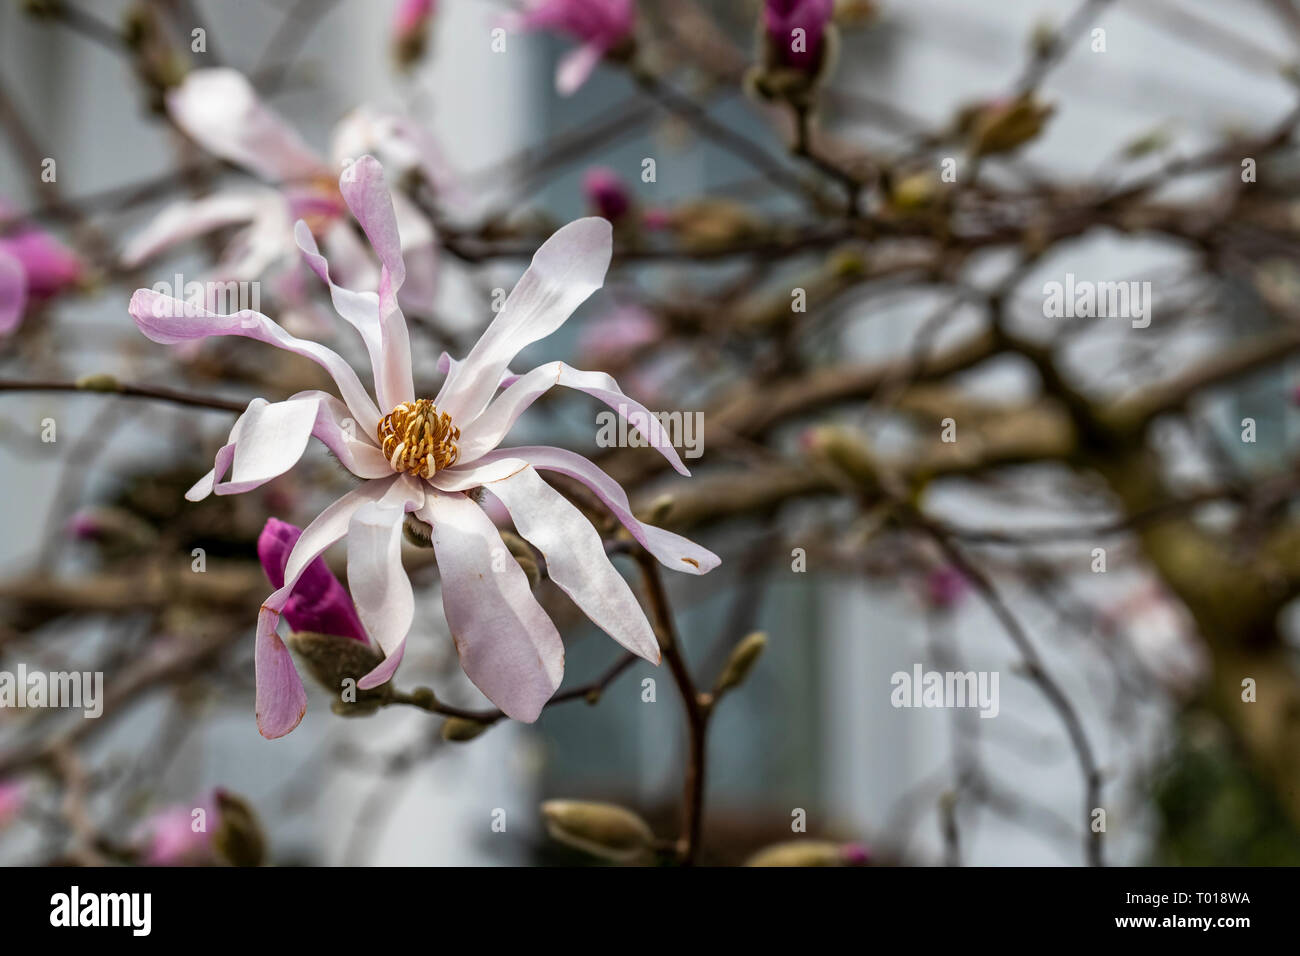 The Magnolias of Phillmore Gardens, London in the spring. Stock Photo